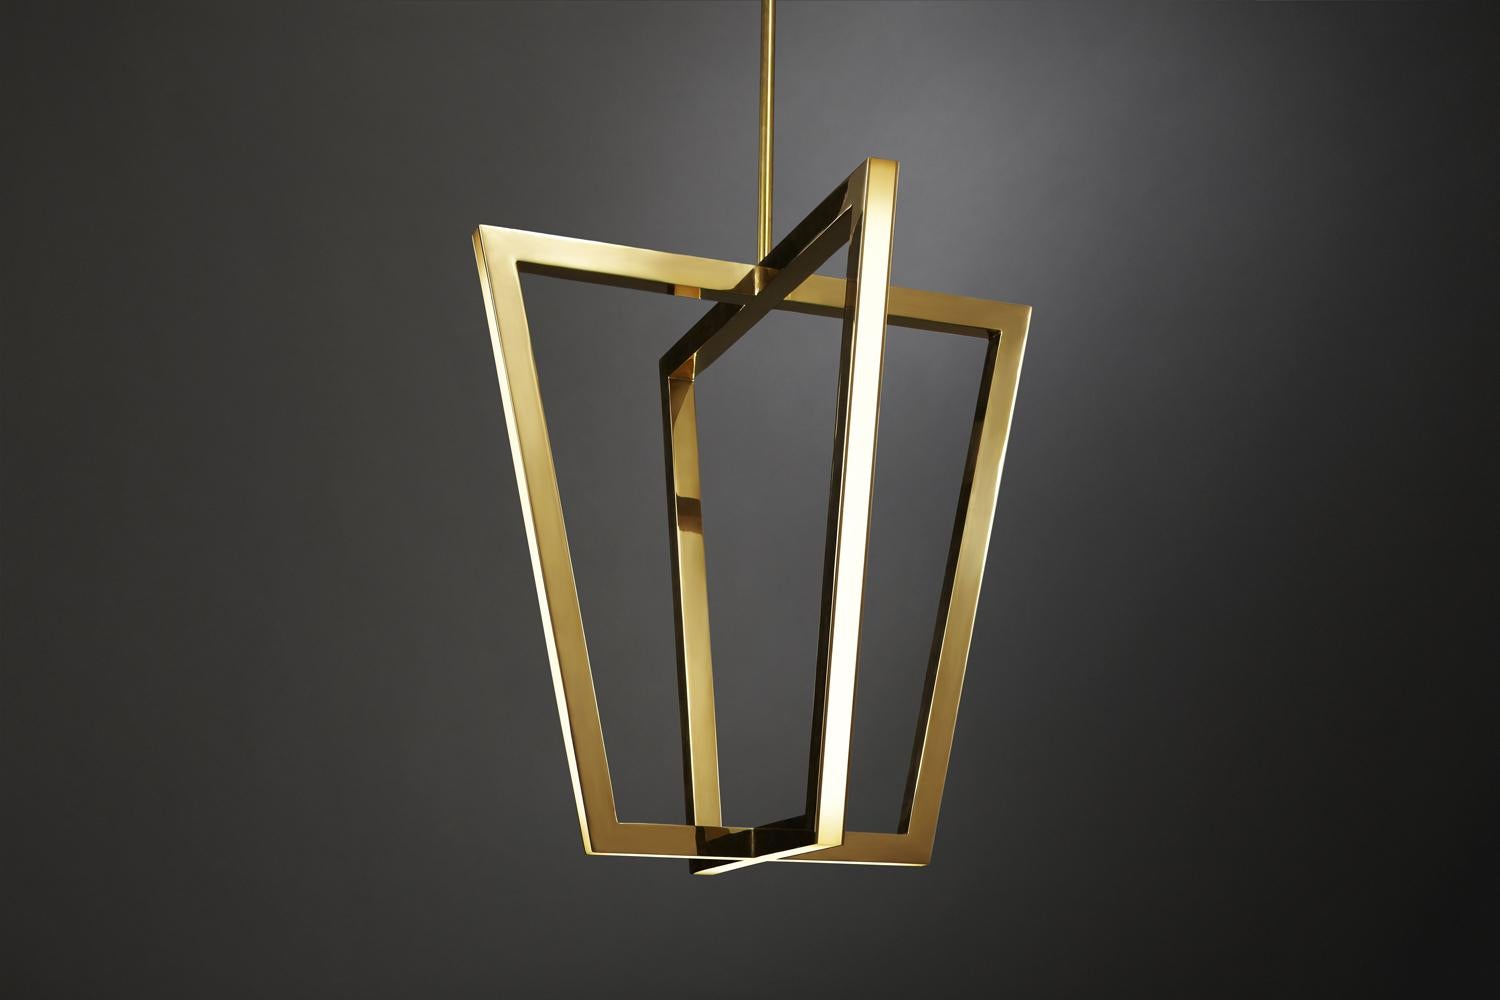 Contemporary polished brass pendant light - Quadrix by Christopher Boots

Reworking the concept of the traditional lantern, QUADRIX is inspired by the four cardinal points. Slices of LED emanate from brass, setting the standard in 21st century